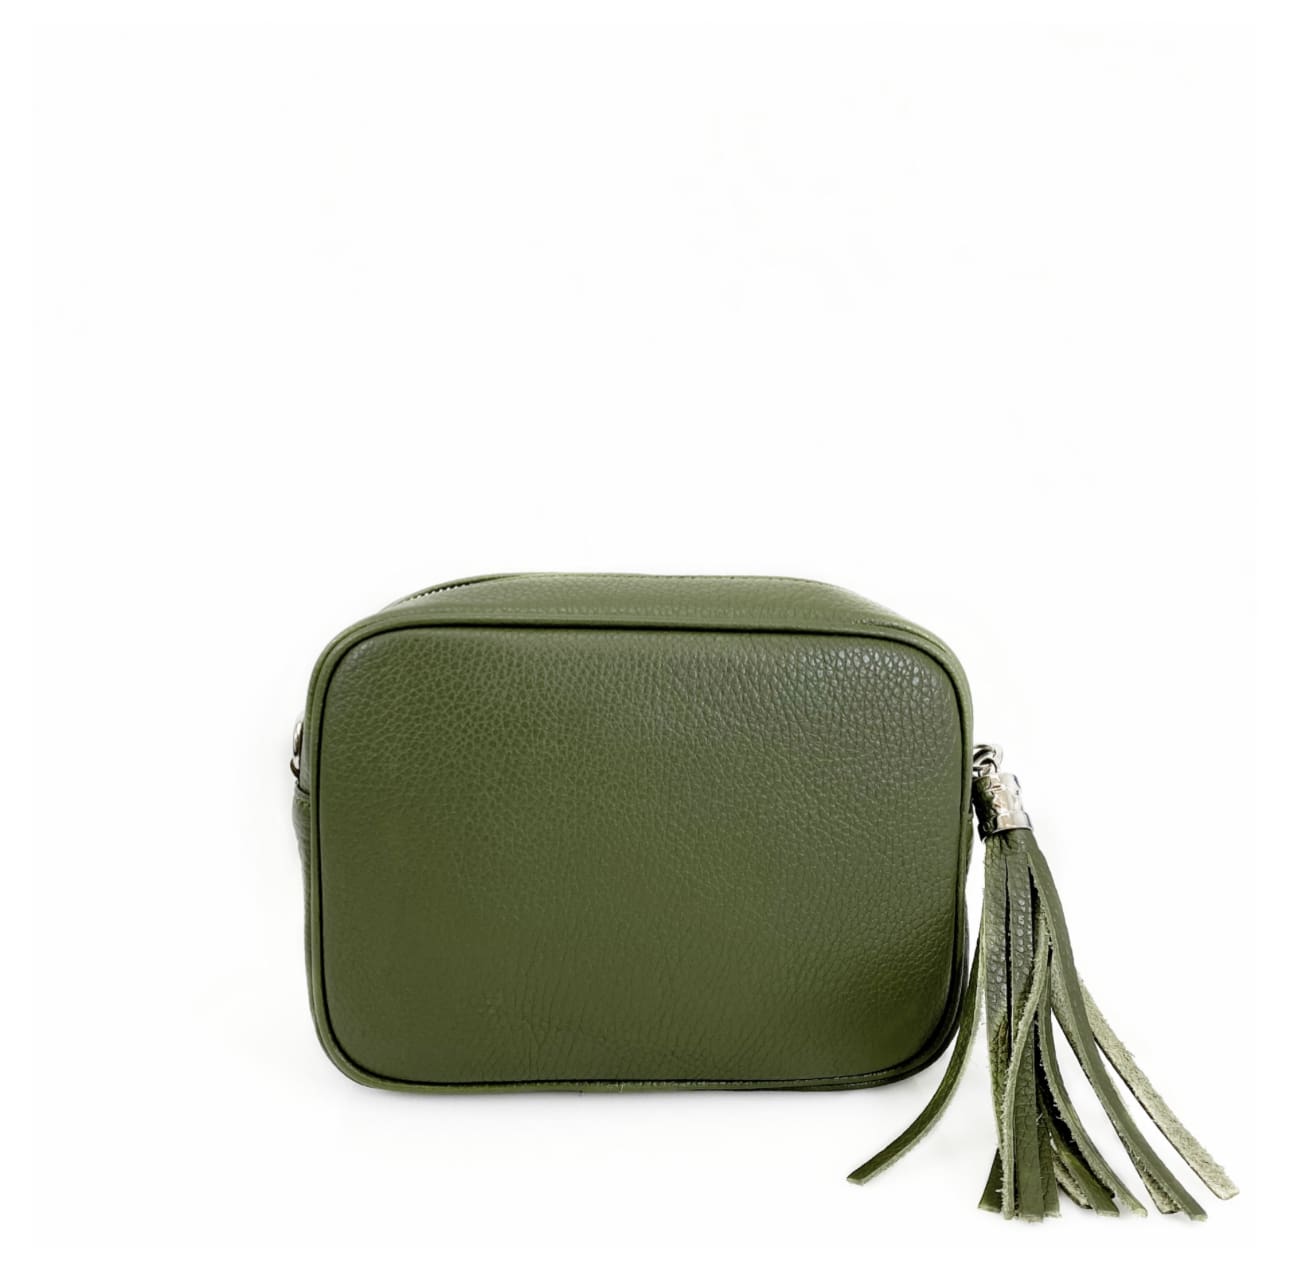 A green leather cross body bag with a tassel.